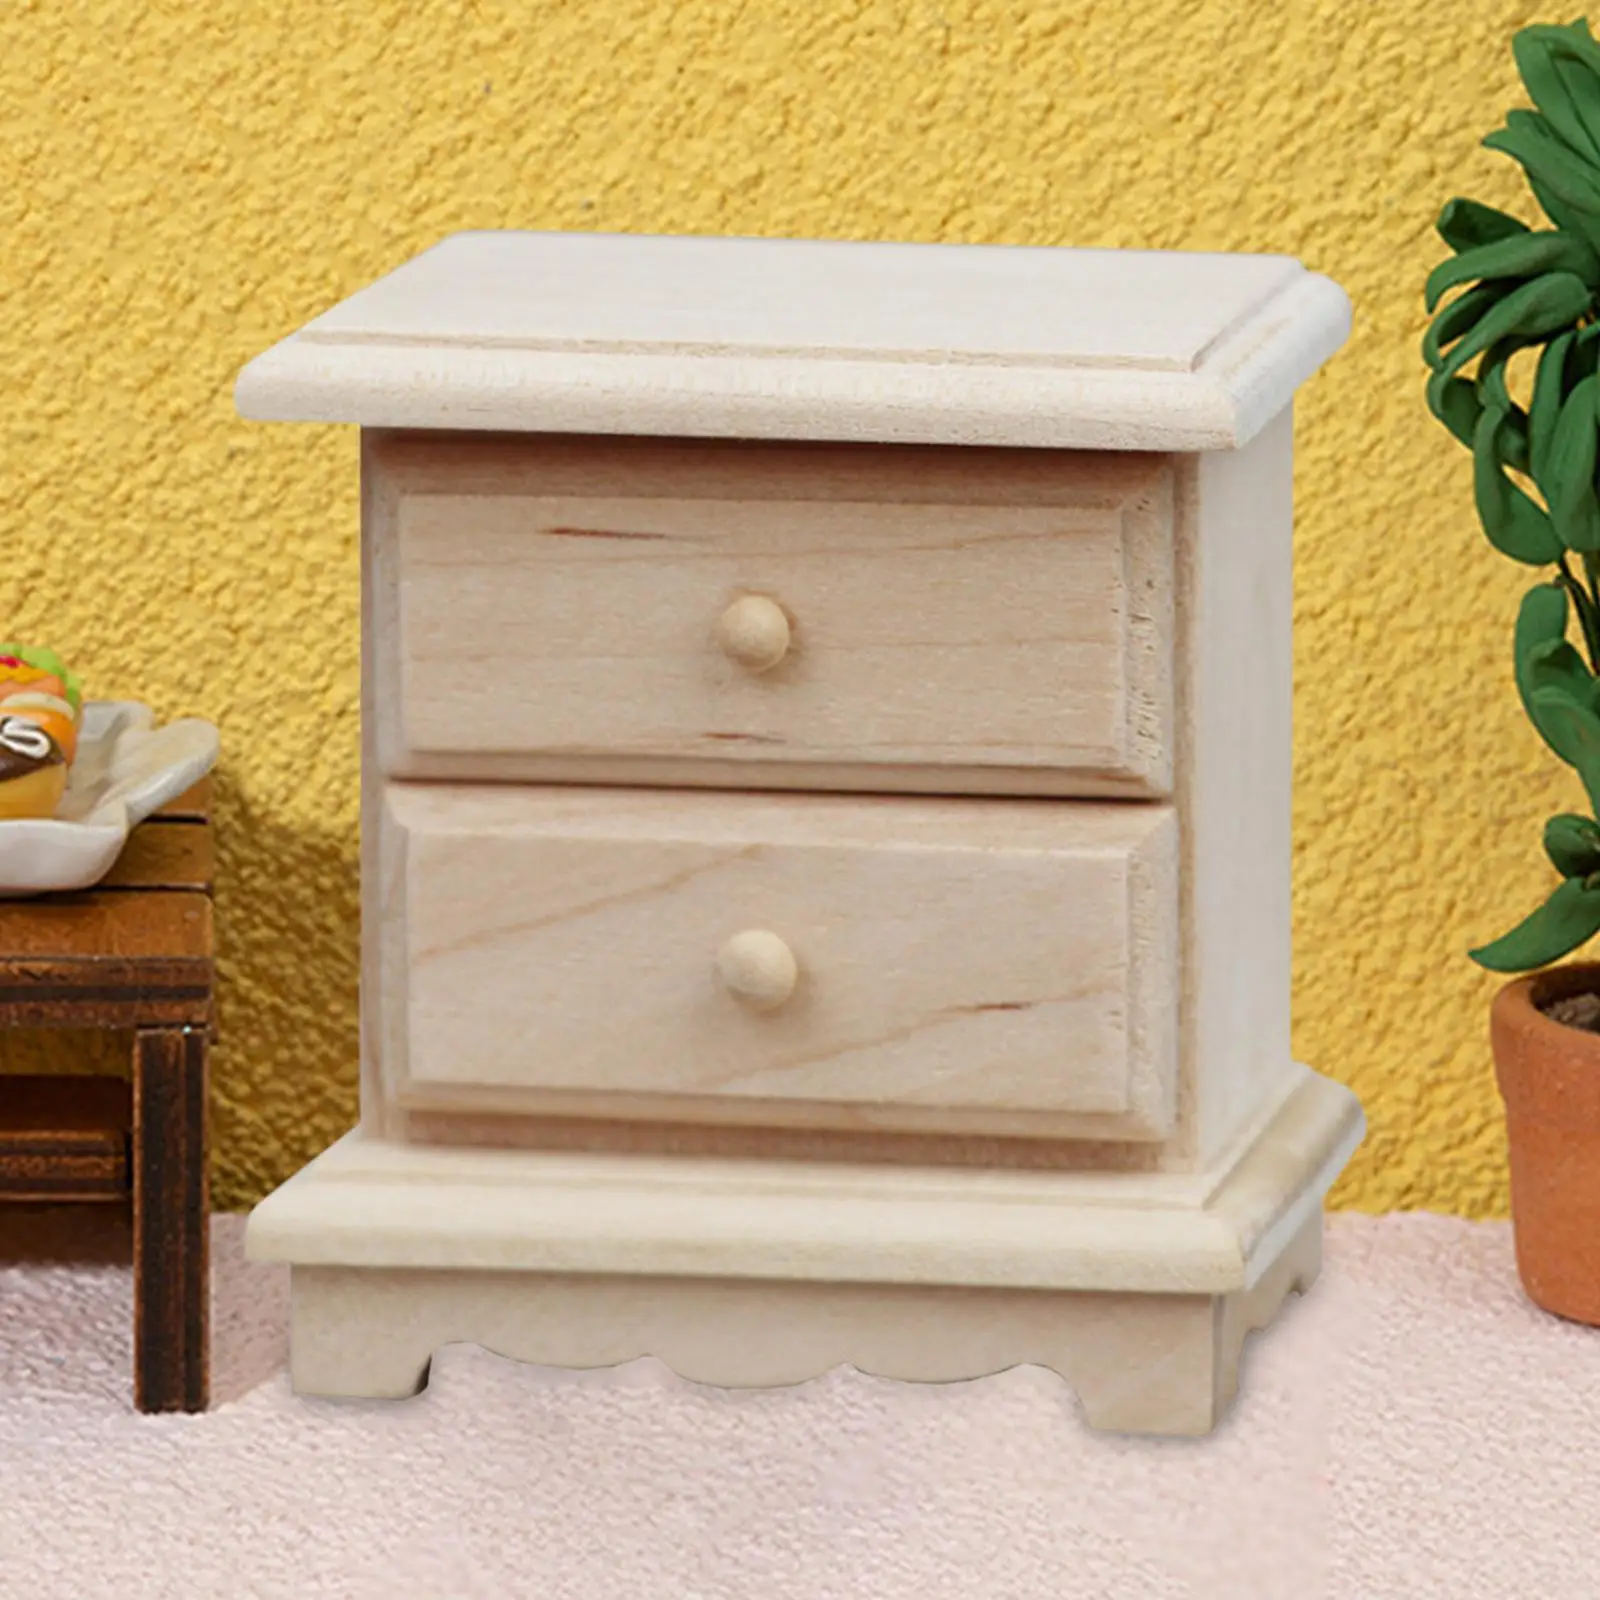 1:12 Dollhouse Bedside Table Storage Drawer Cabinet Doll House Bedroom Decor for